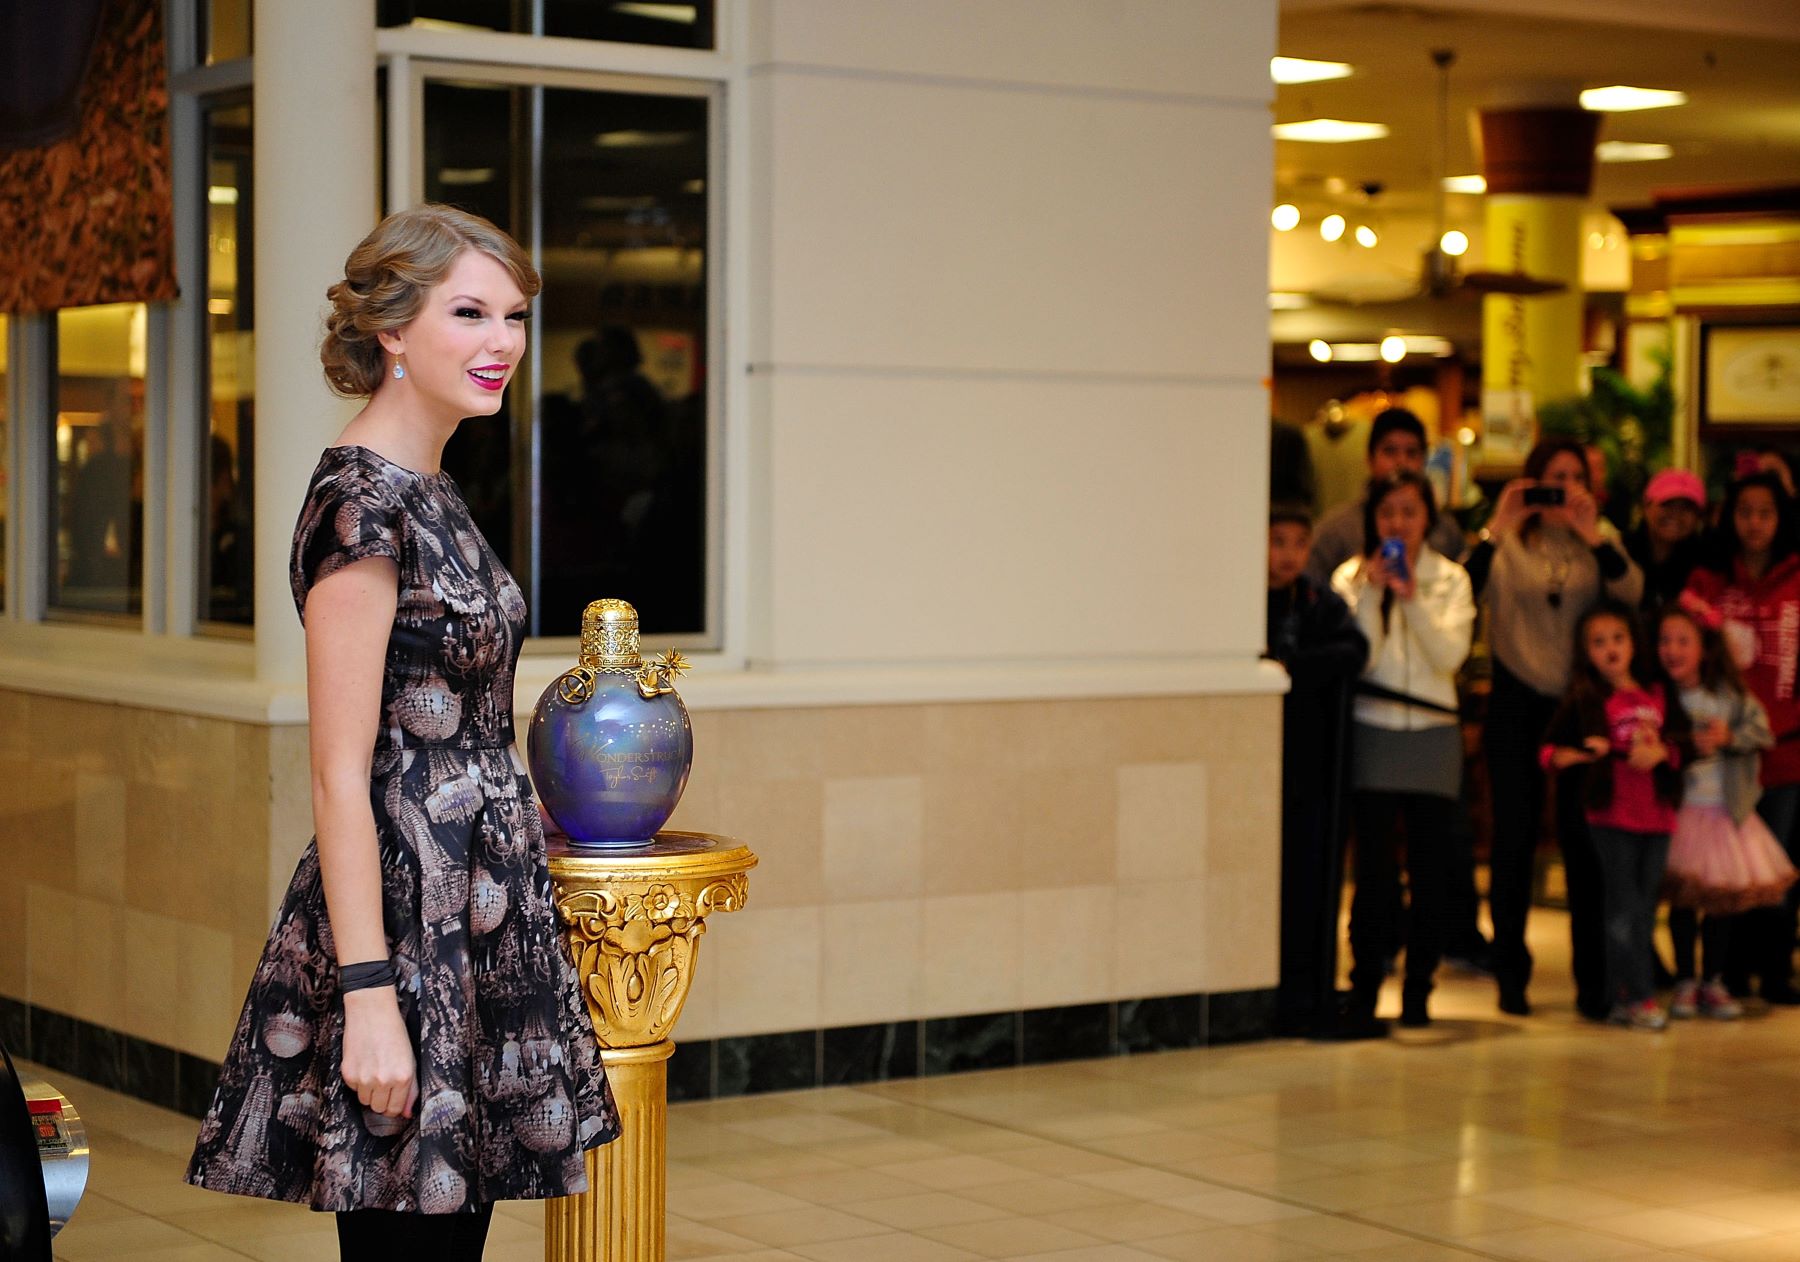 Taylor Swift at her Wonderstruck fragrance launch at Belk Cool Springs Galleria in Franklin, Tennessee